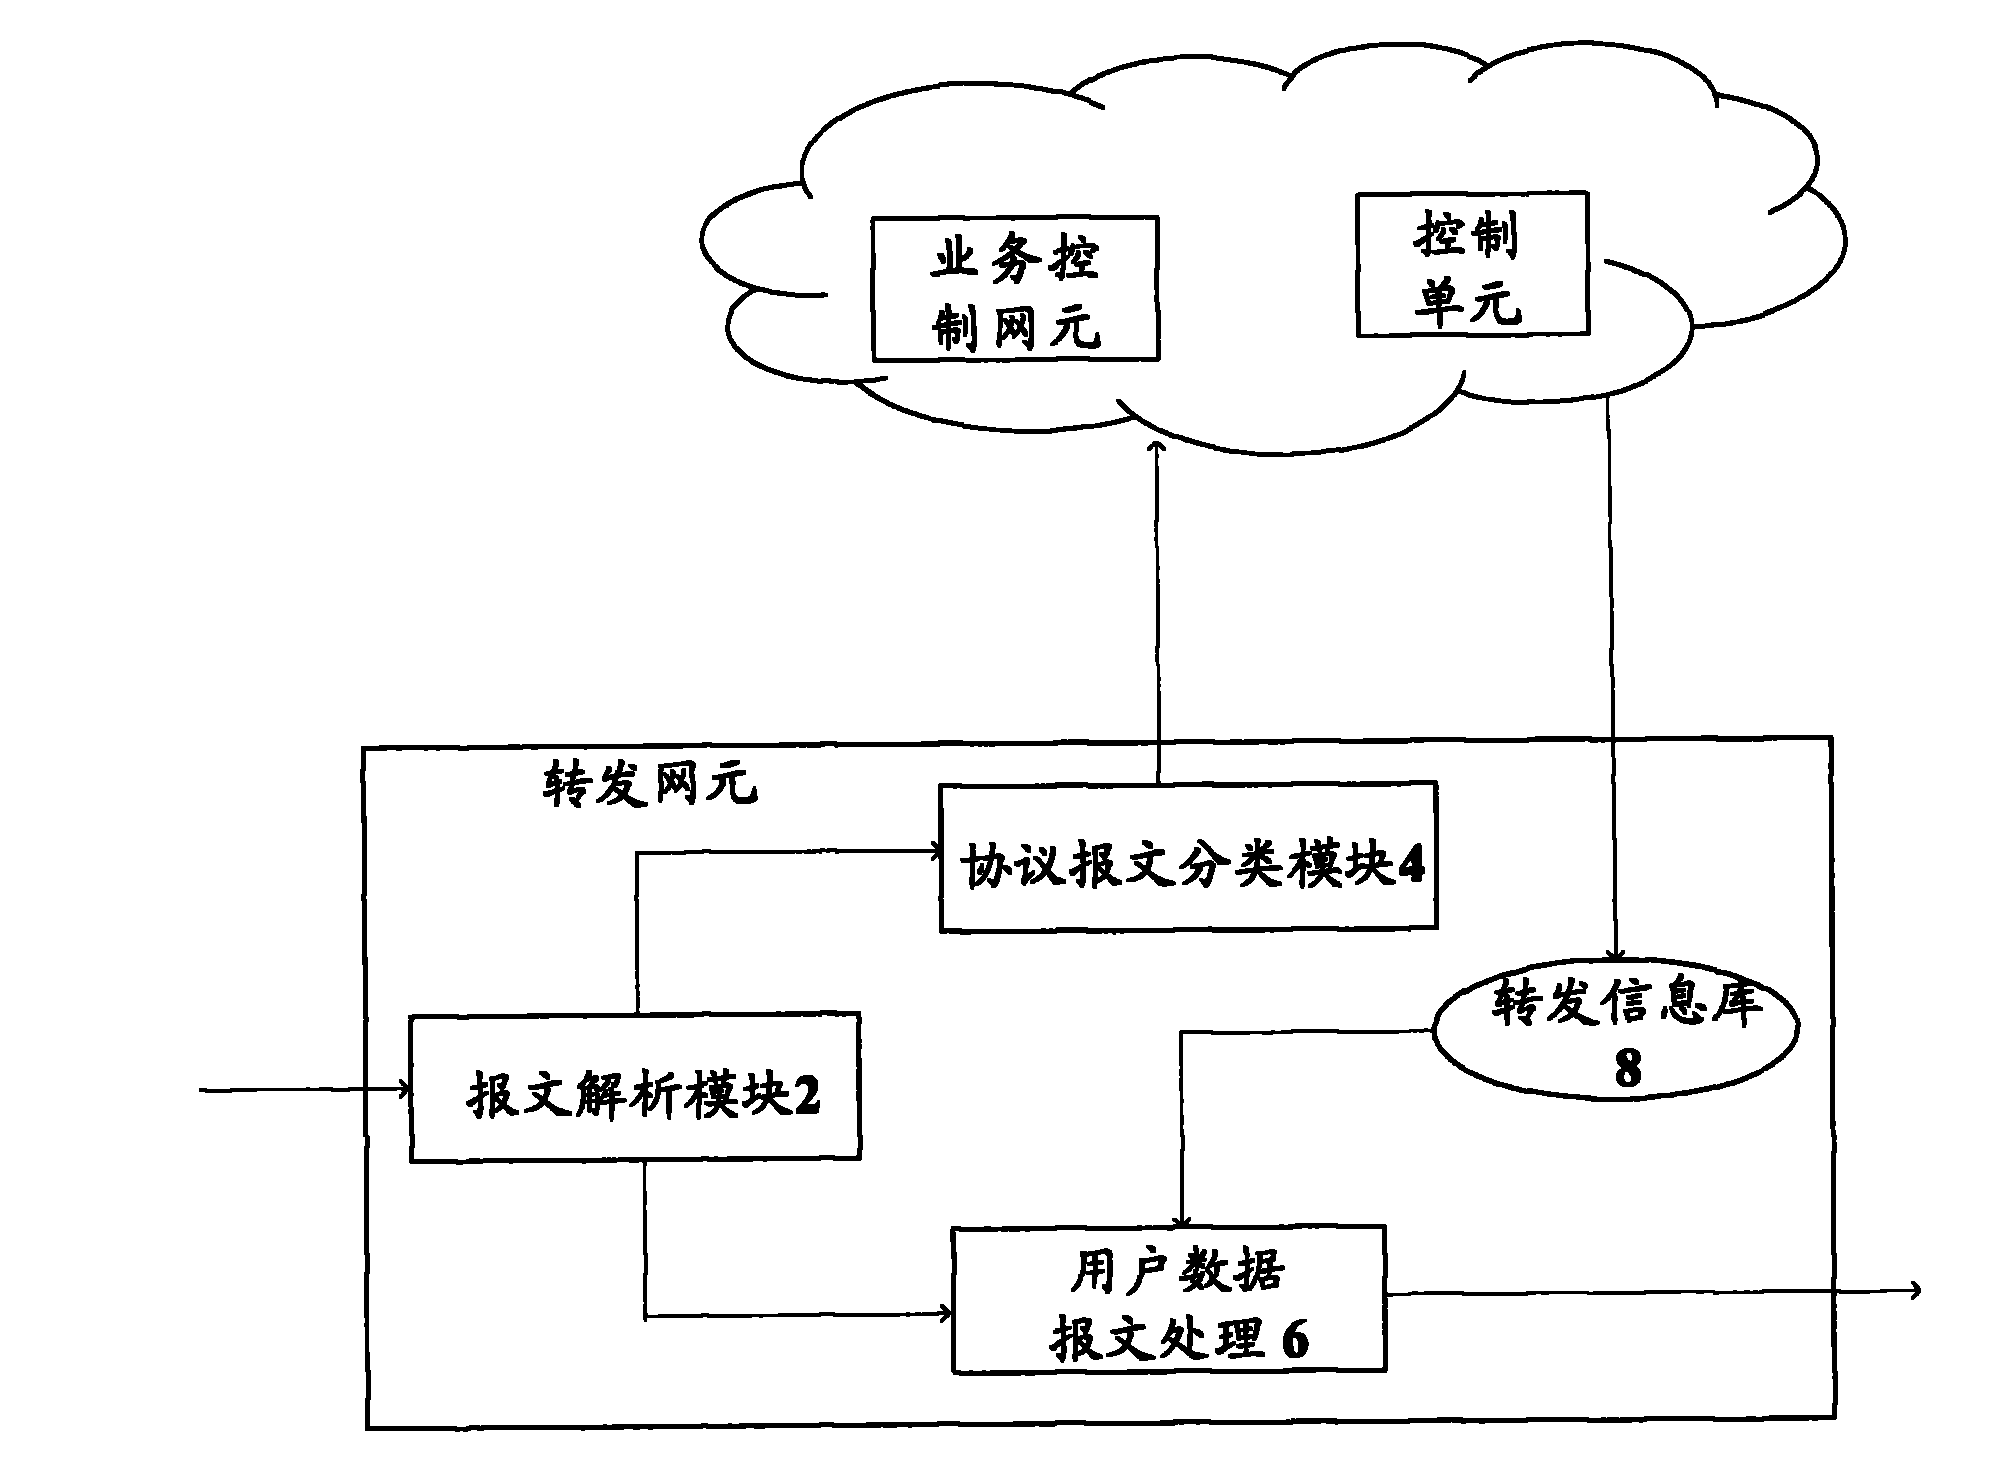 Forwarding device and method